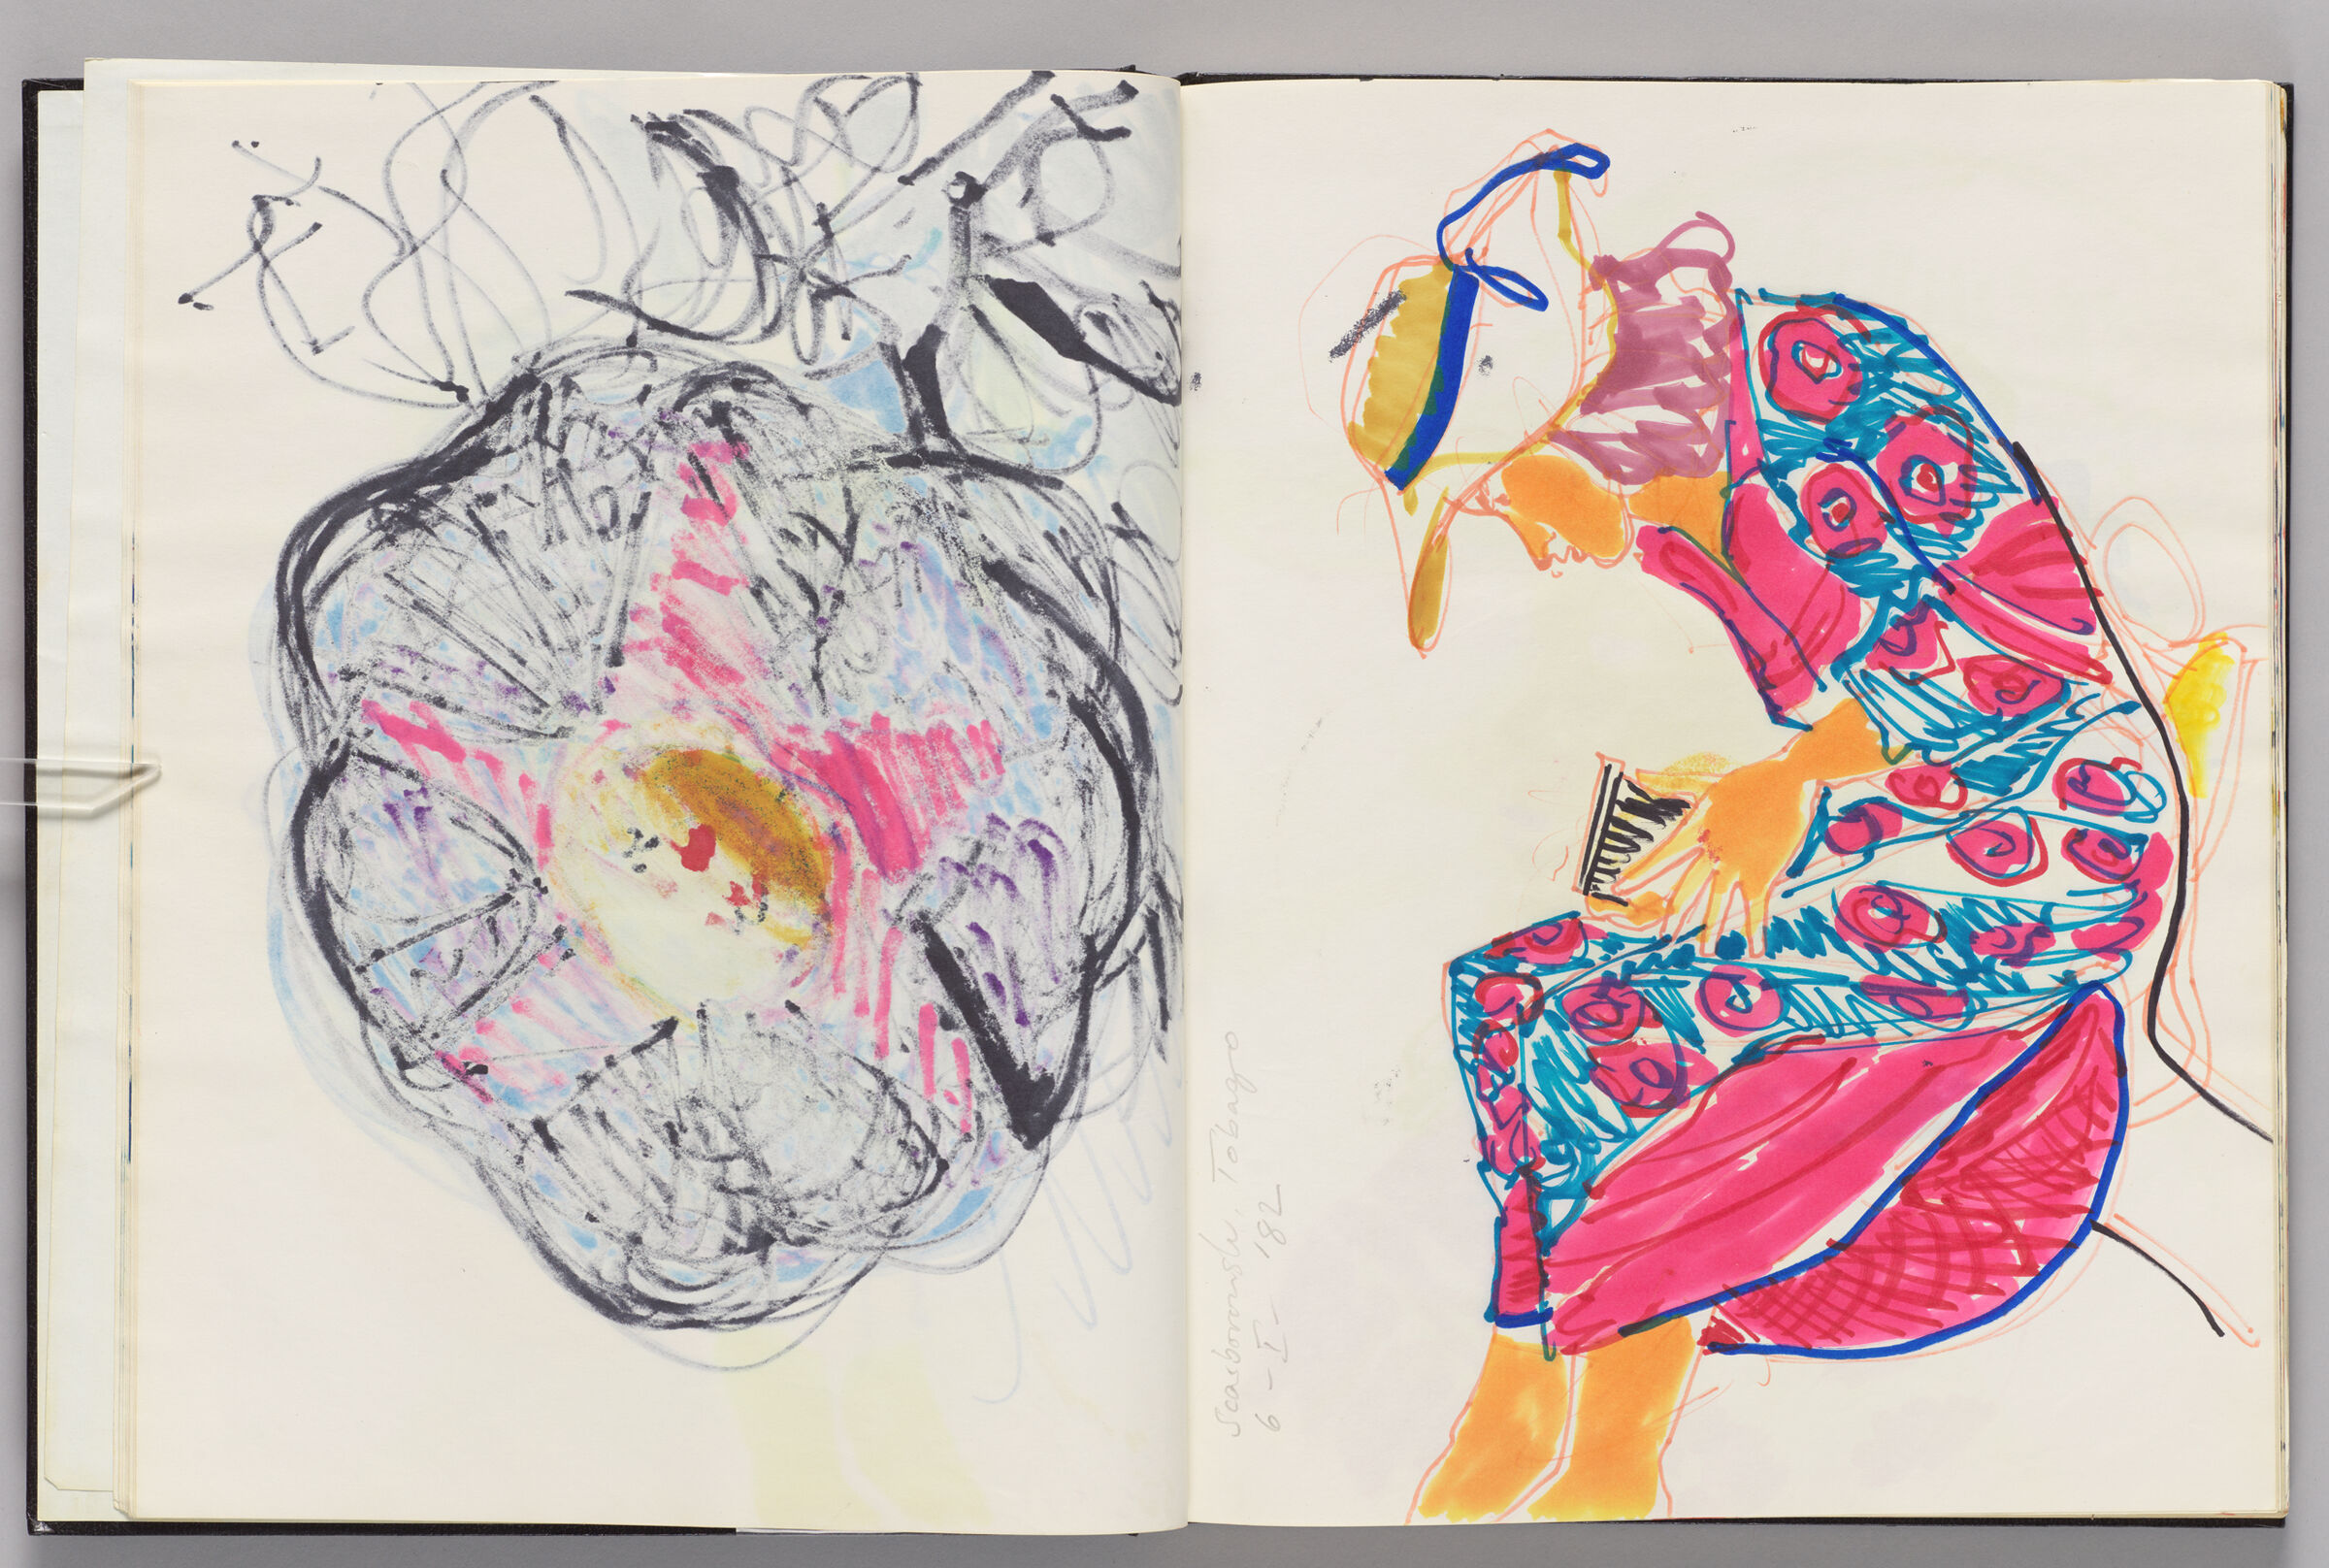 Untitled (Bleed-Through Of Previous Page, Left Page); Untitled (3/4 Portrait Of Female Figure (Elizabeth Goldring) Reading, Right Page)